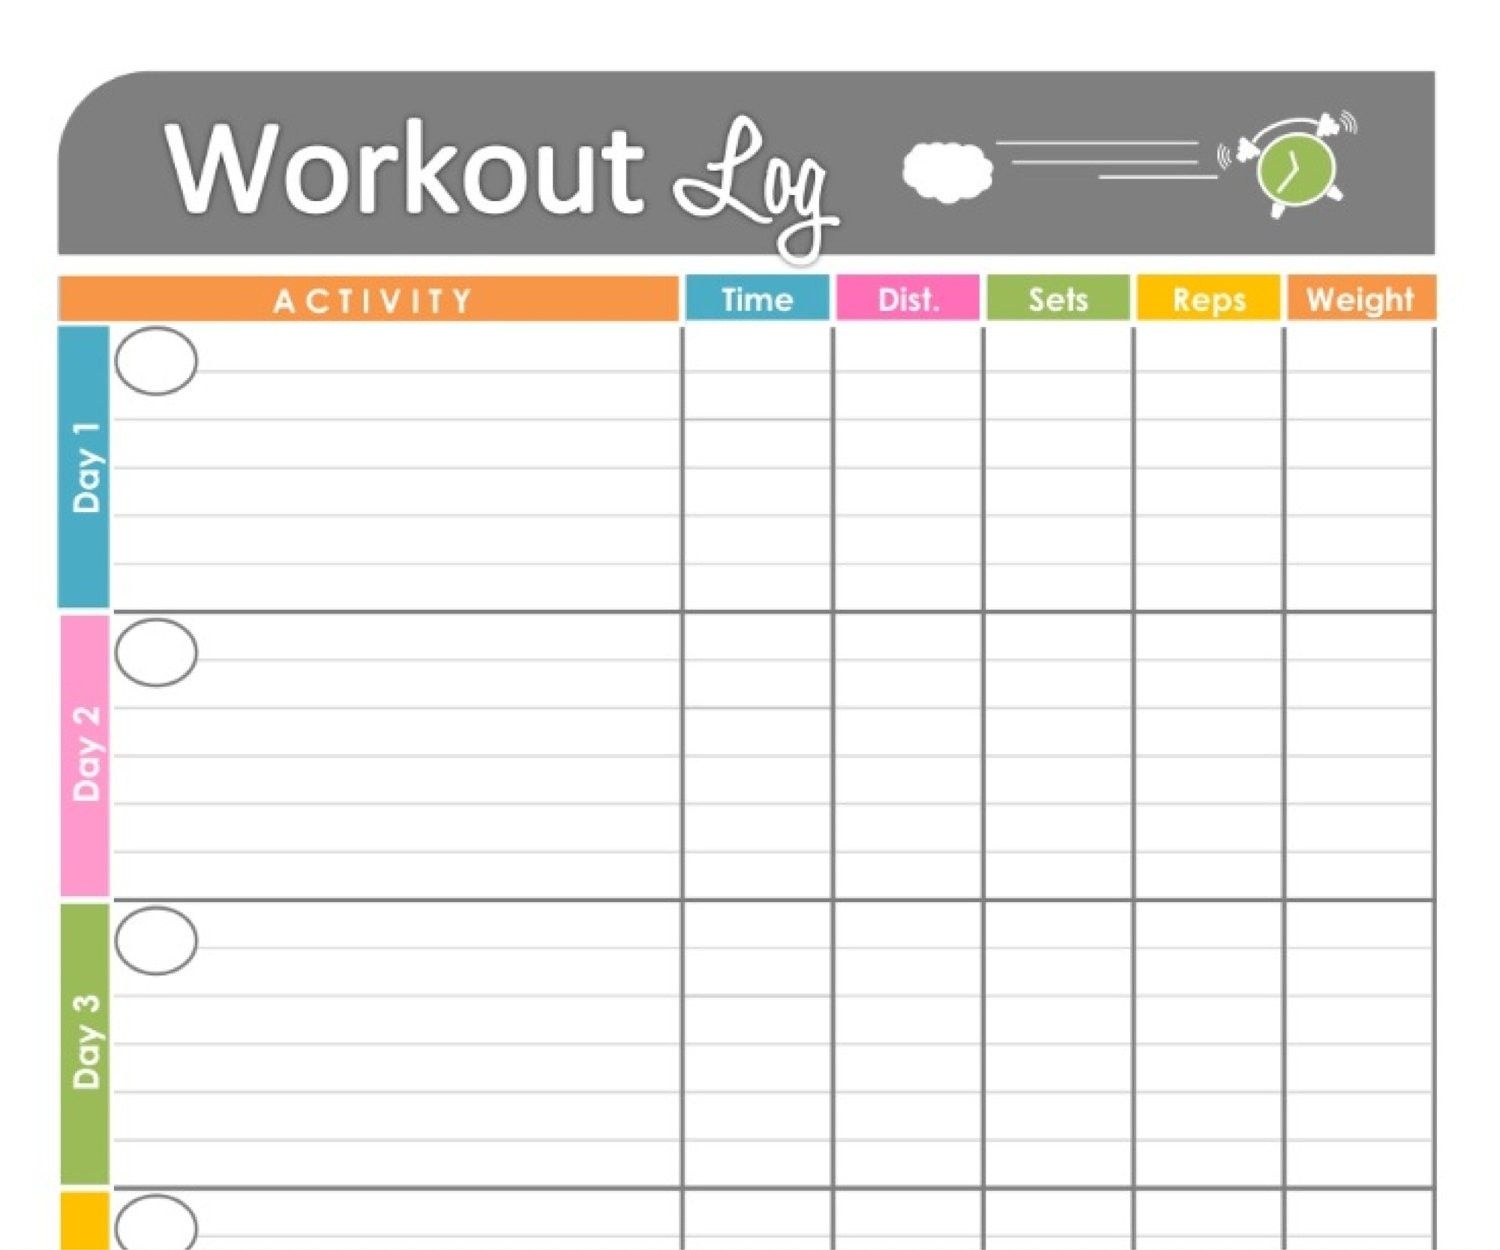 Pinkristy Winburn-Revels On School Planners &amp;amp; Supplies | Workout - Free Printable Fitness Log